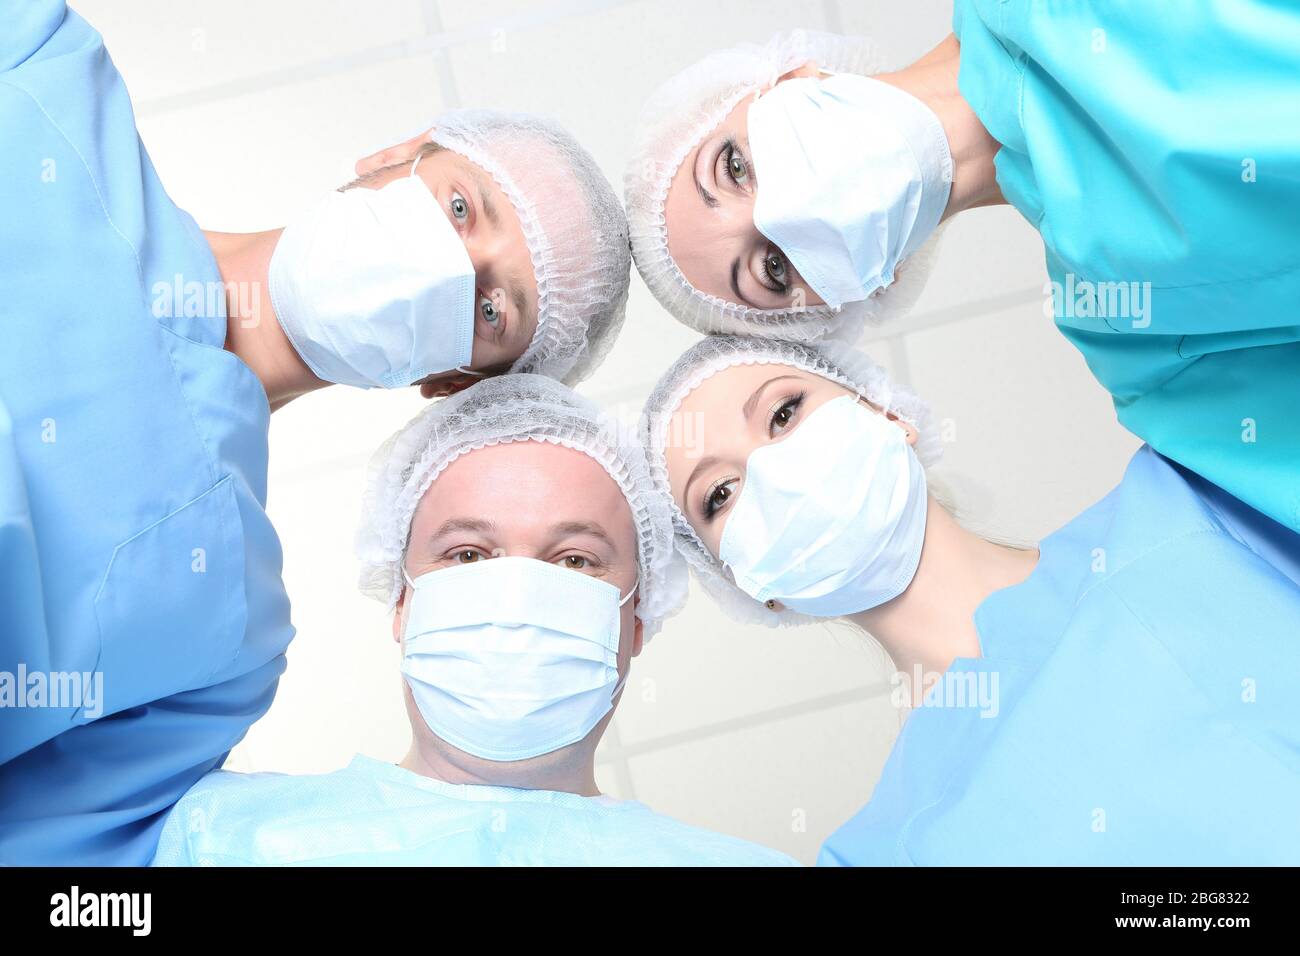 View from below of surgeons in protective work wear during operation Stock Photo